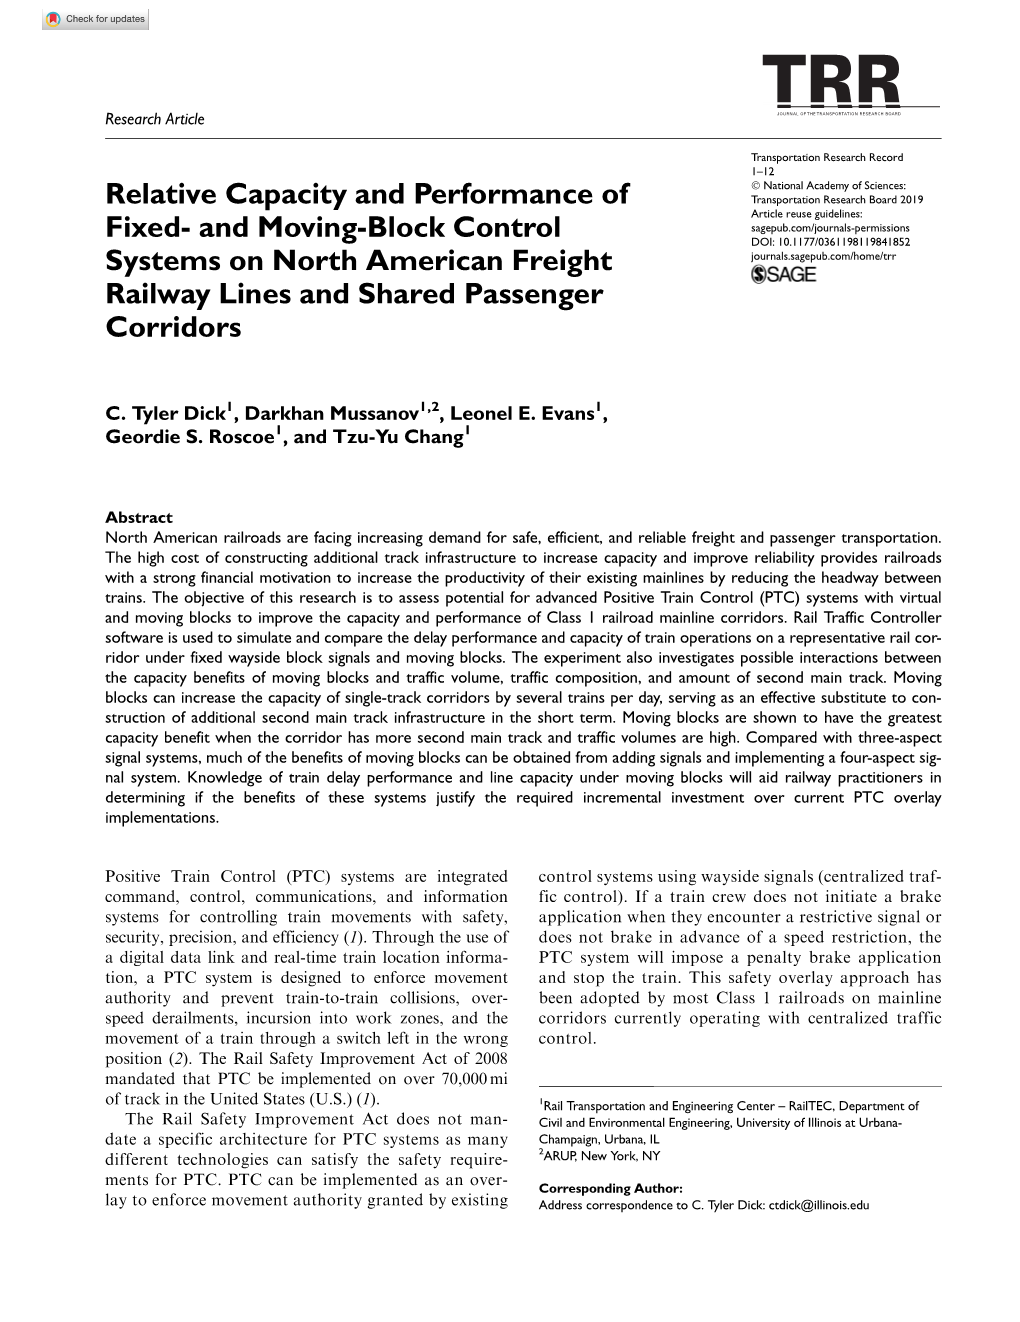 Relative Capacity and Performance of Fixed- and Moving-Block Control